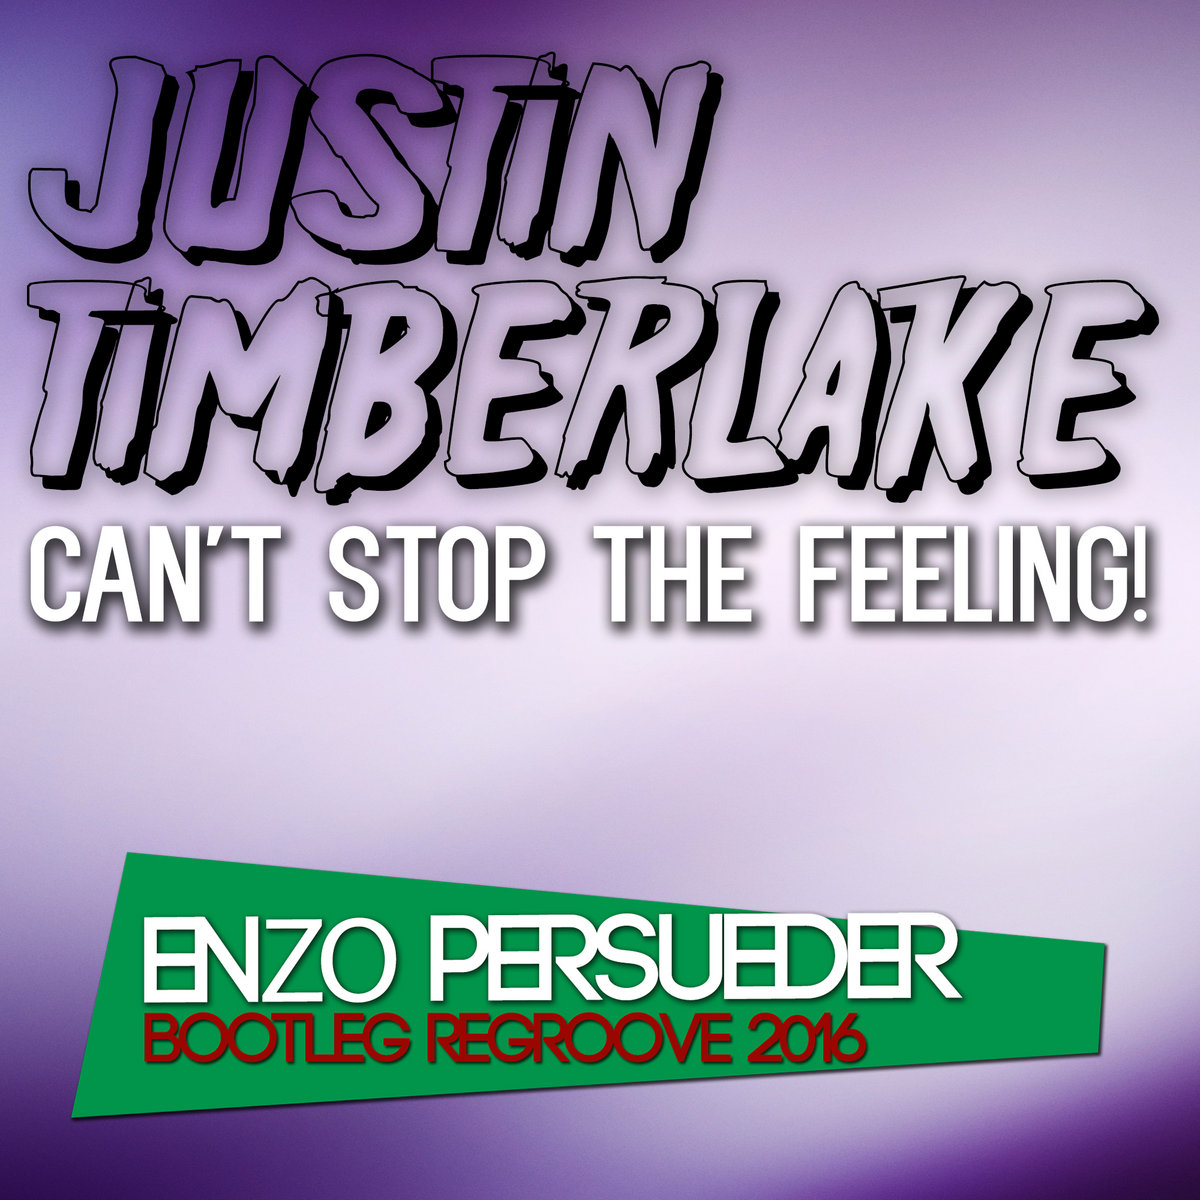 Justin Timberlake - Can't Stop The Feeling (E. Persueder Bootleg Regroove  2016) | Dj Enzo Persueder